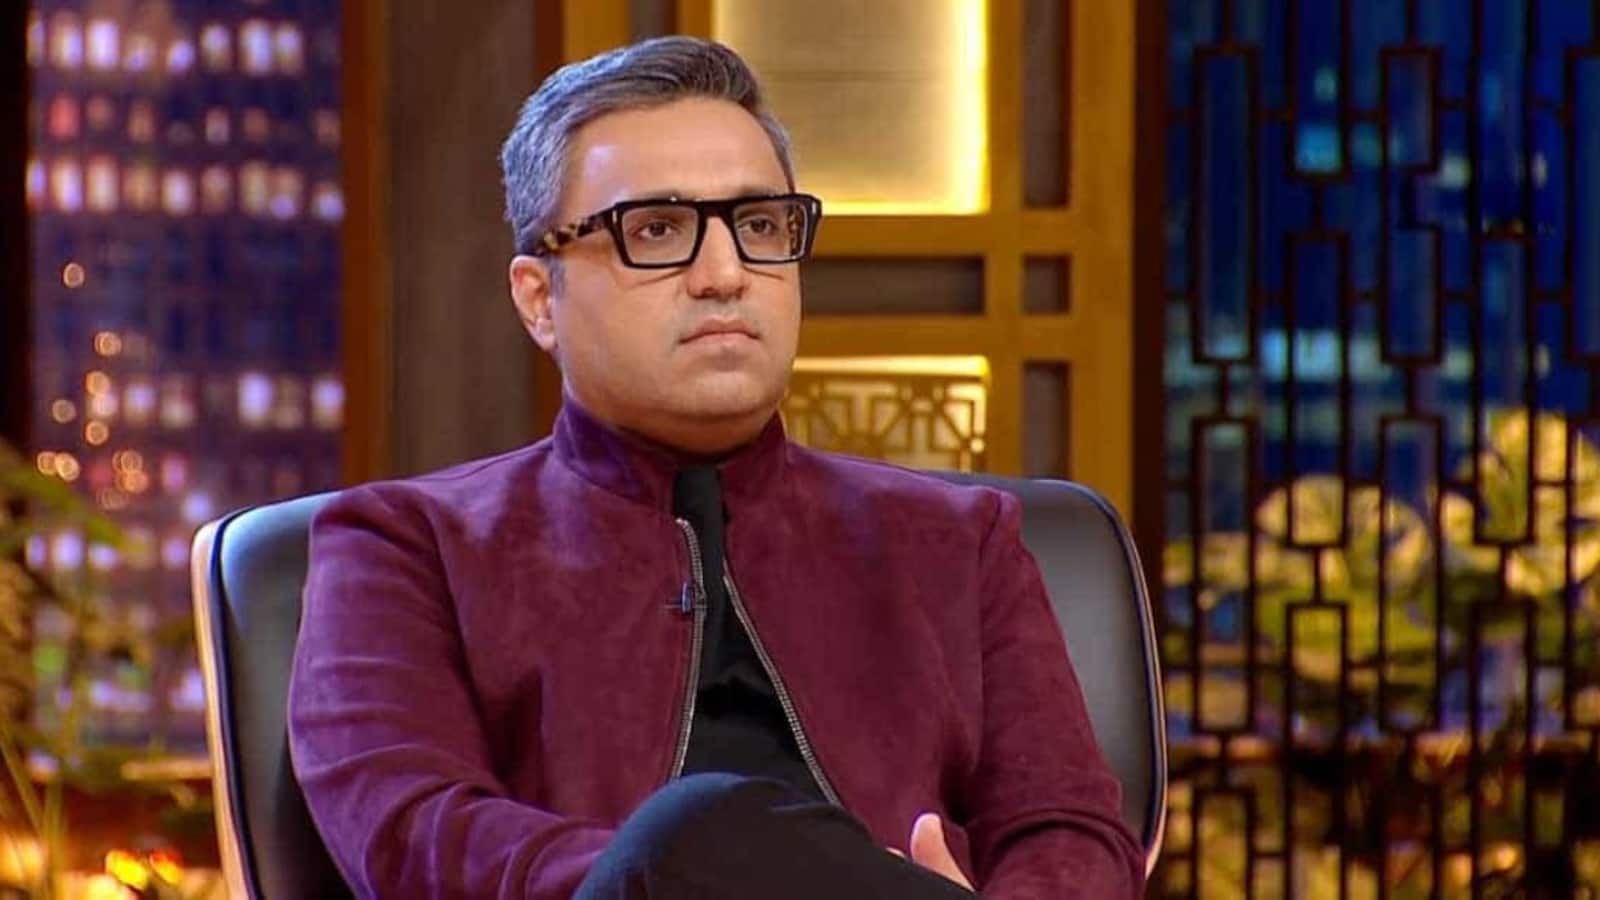 Shark Tank India judge Ashneer Grover trends on Twitter as his memes go viral; this is pure gold